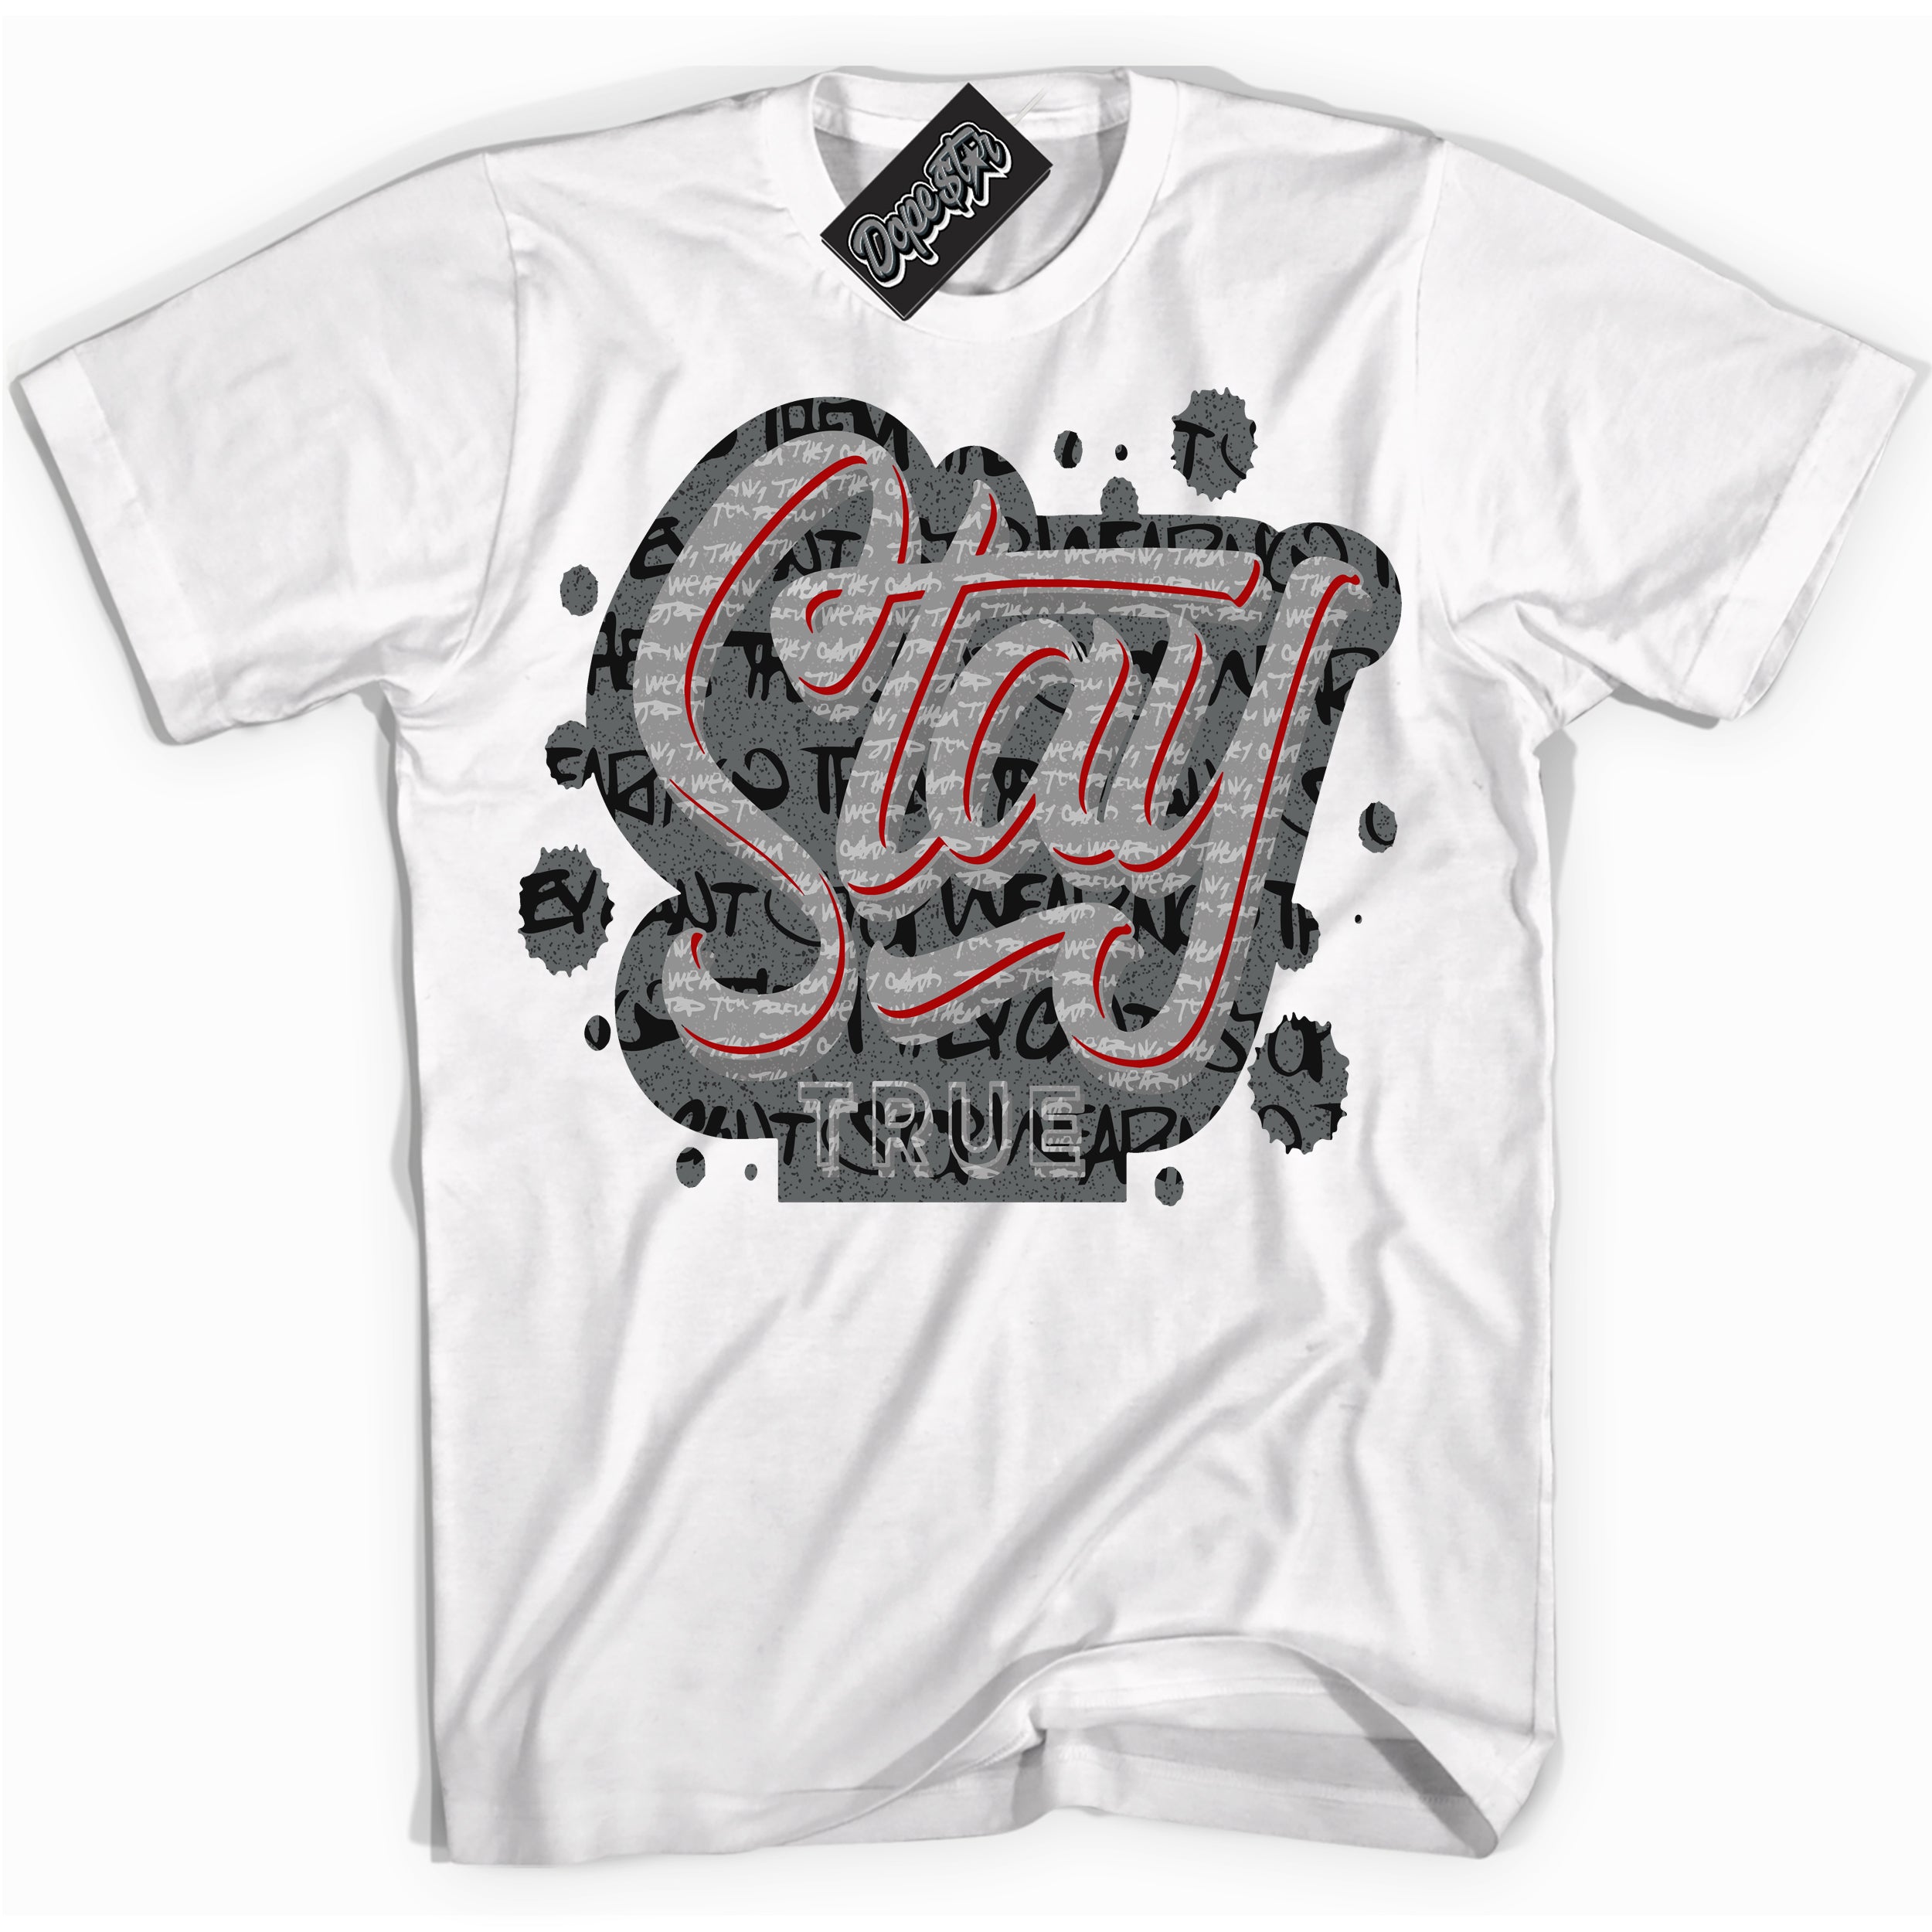 Cool White Shirt with “ Stay True ” design that perfectly matches Rebellionaire 1s Sneakers.